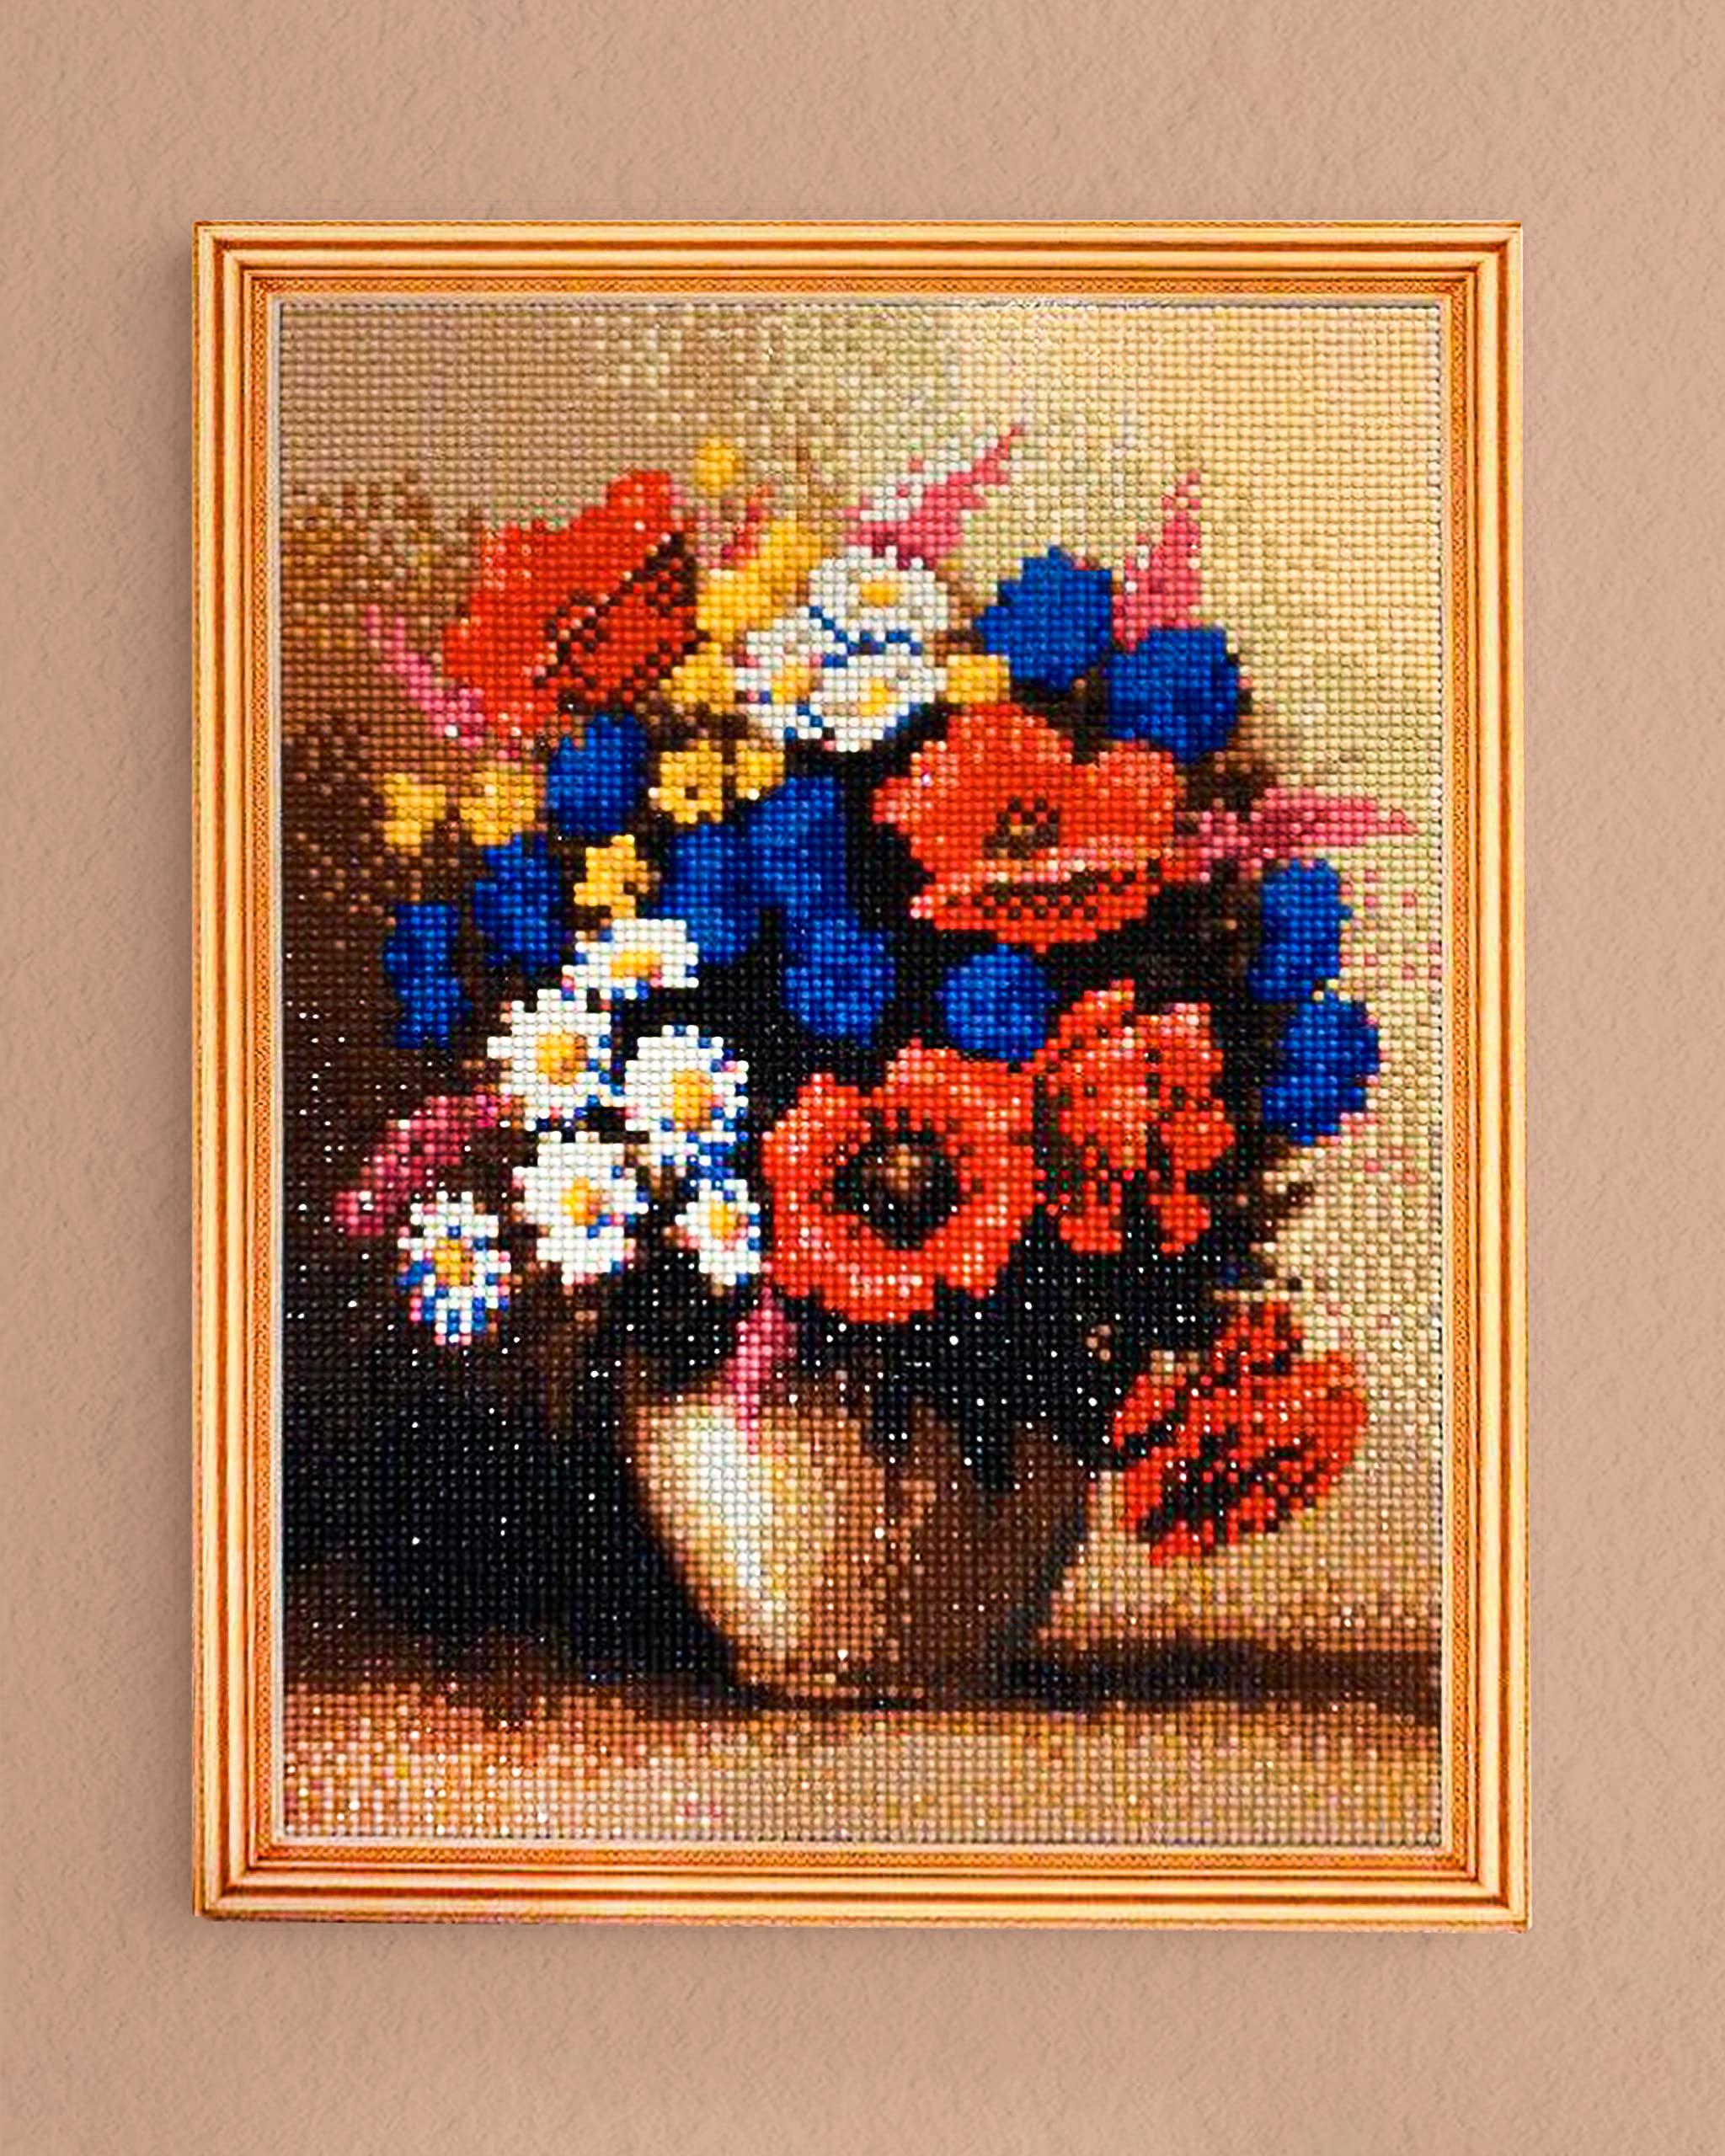 TSVETNOY tsvetnoy 5d diamond painting kits for adults and kids on framed  canvas 12x16 inches - round full drill gem art kit flowers 